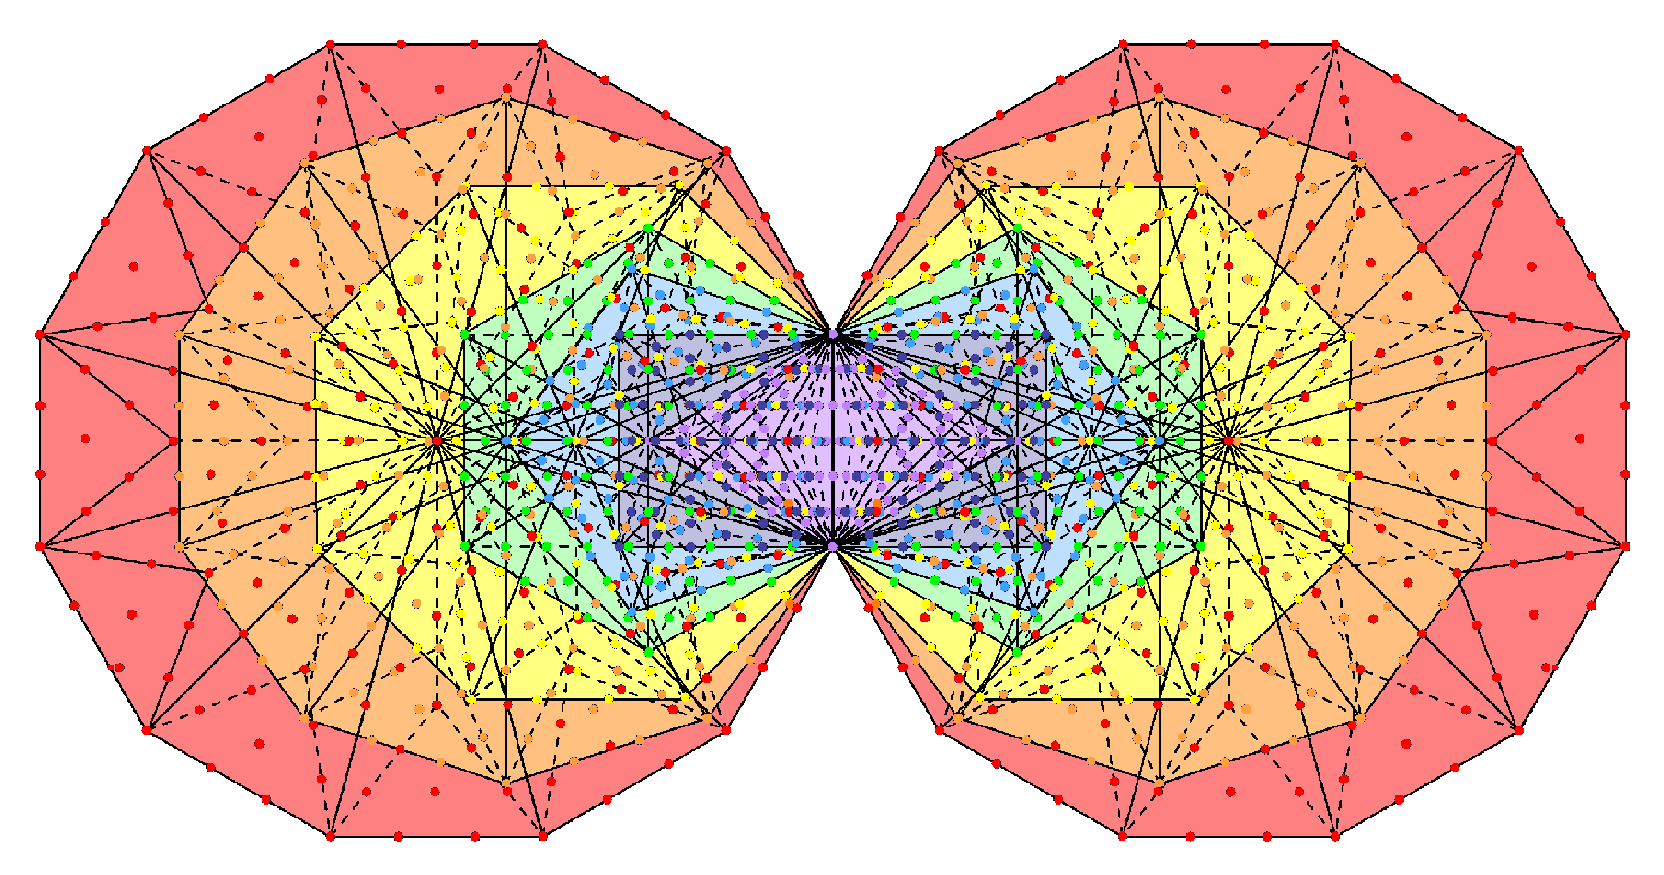 1370 yods in (7+7) enfolded Type B polygons